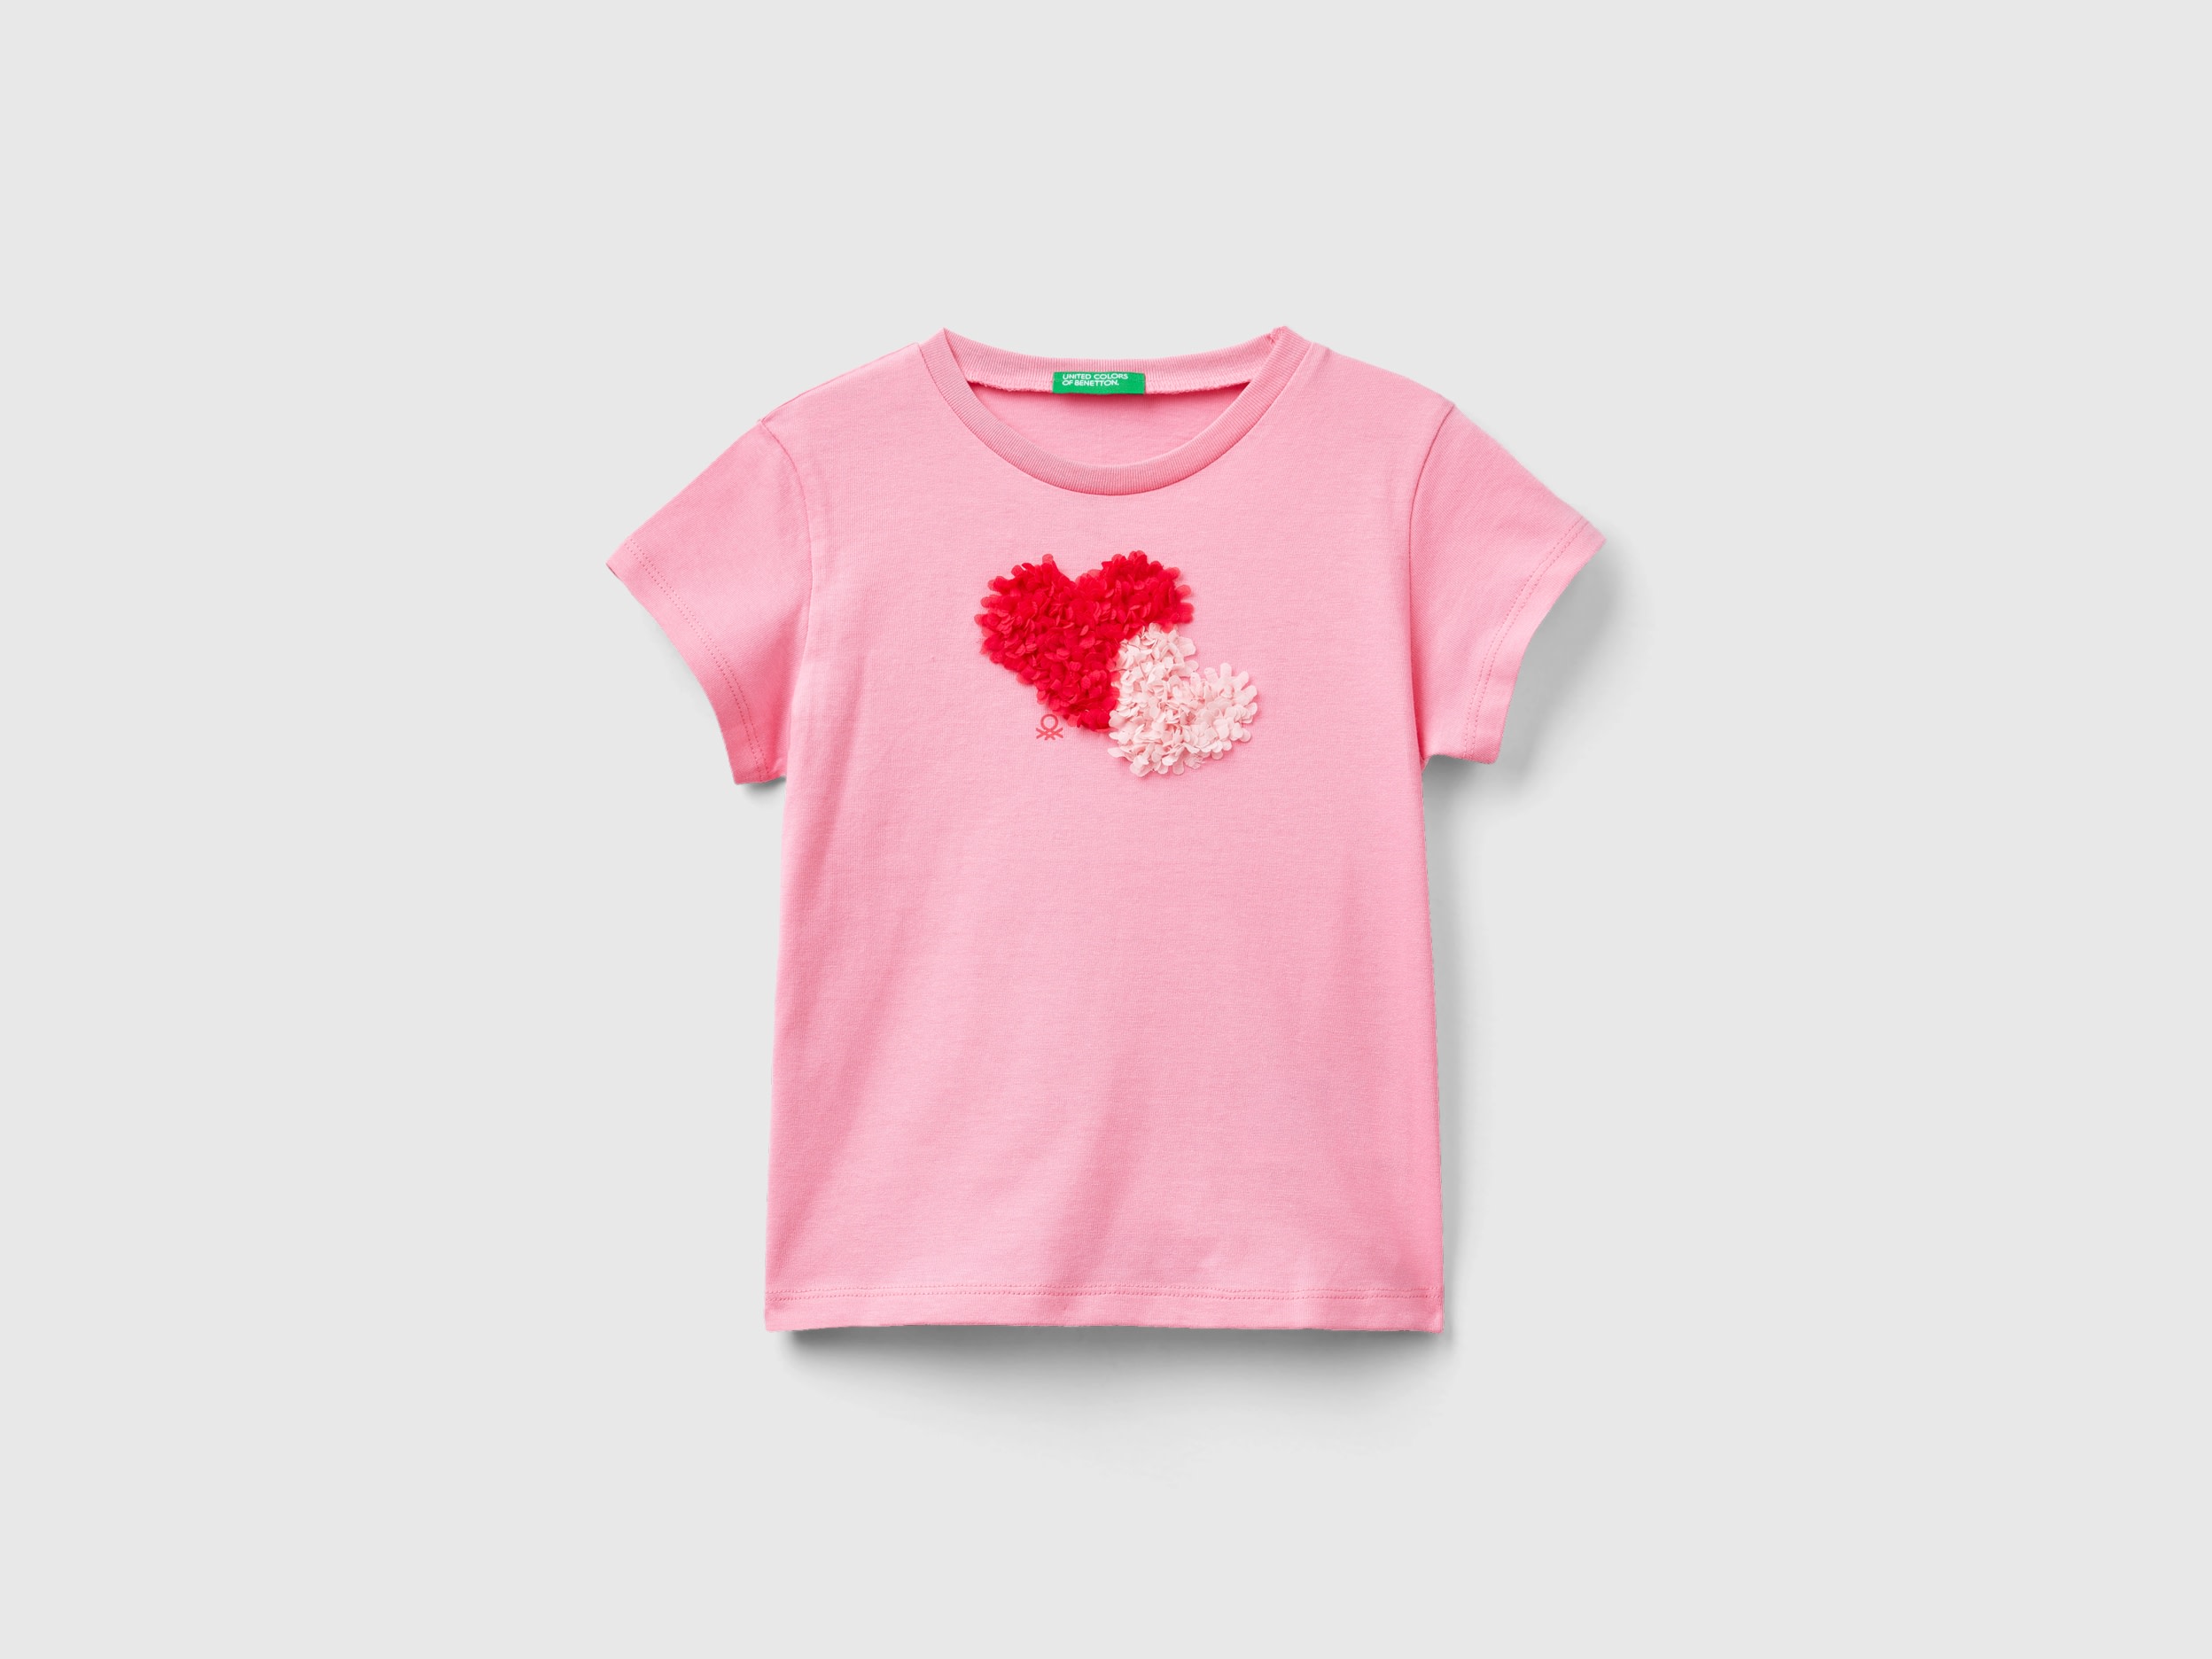 Image of Benetton, T-shirt With Petal Effect Applique, size 98, Pink, Kids